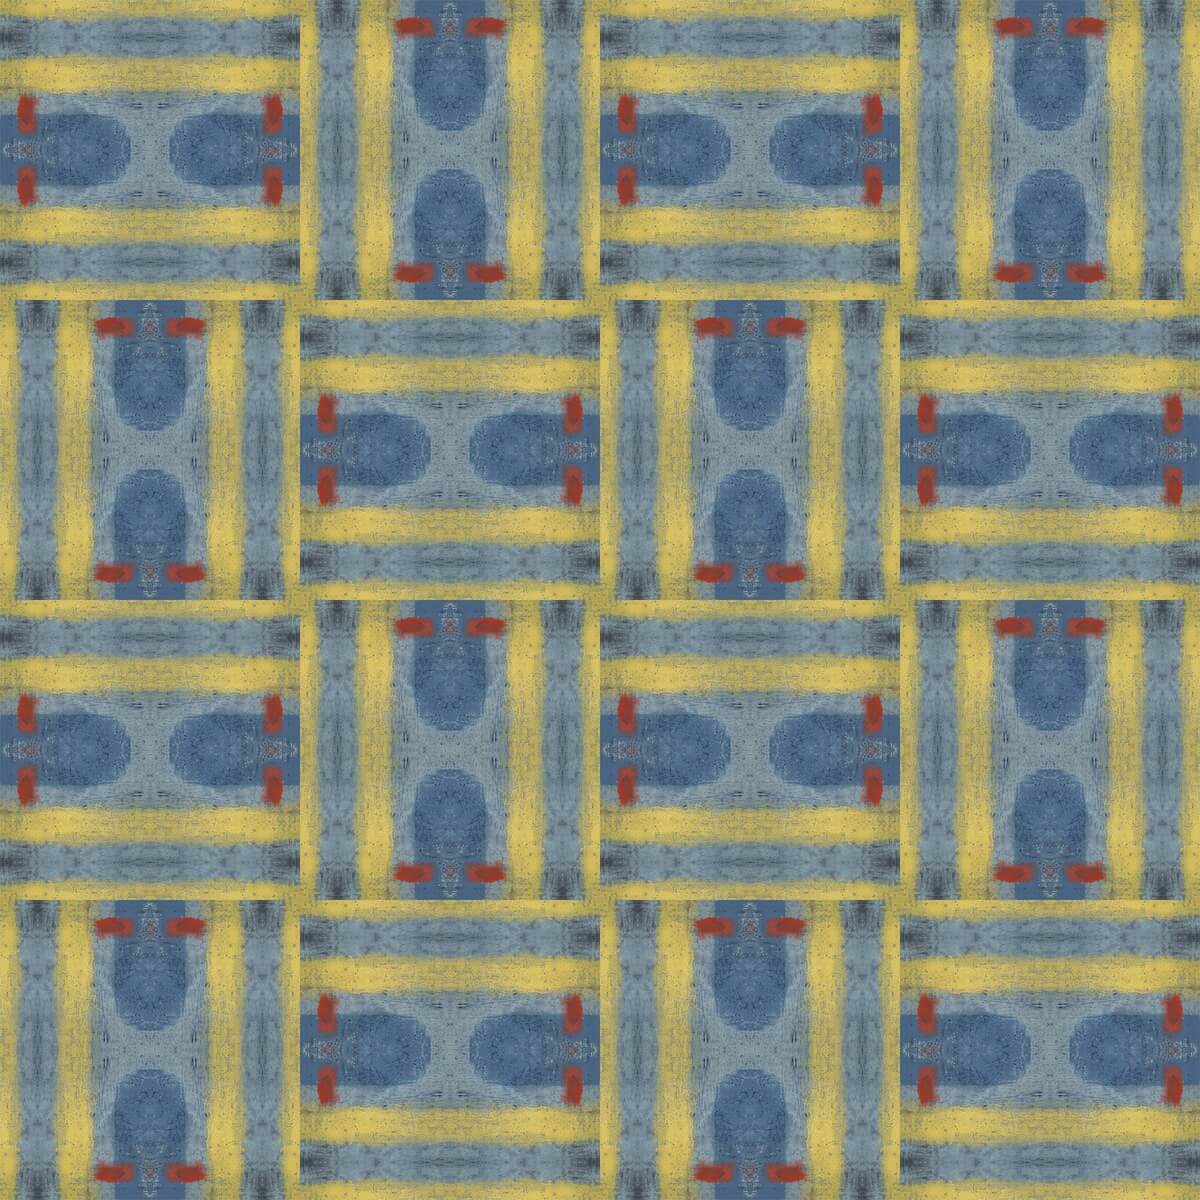 Narrative IV pattern in blue, red, yellow